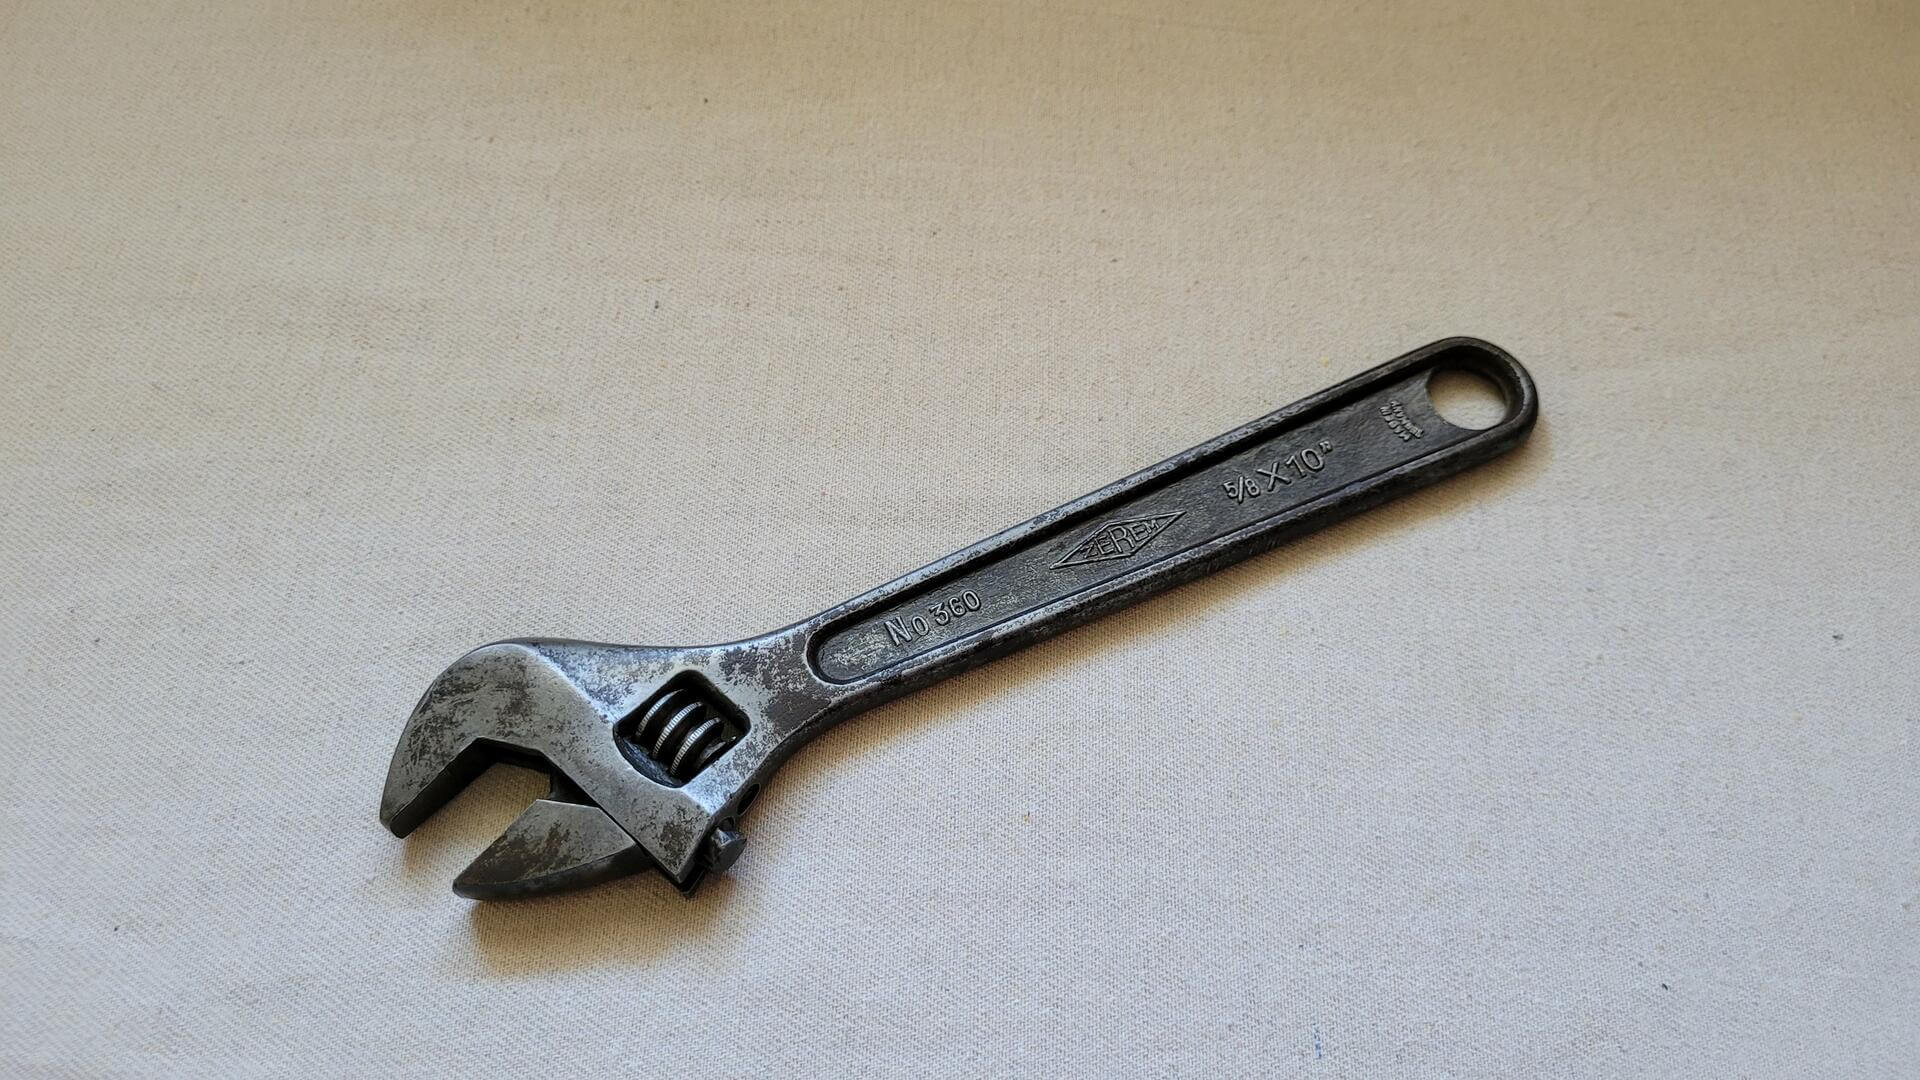 zerem-no-360-adjustable-spanner-wrench-10-inches-vintage-antique-made-in-germany-collectible-mechanic-tools-top-view